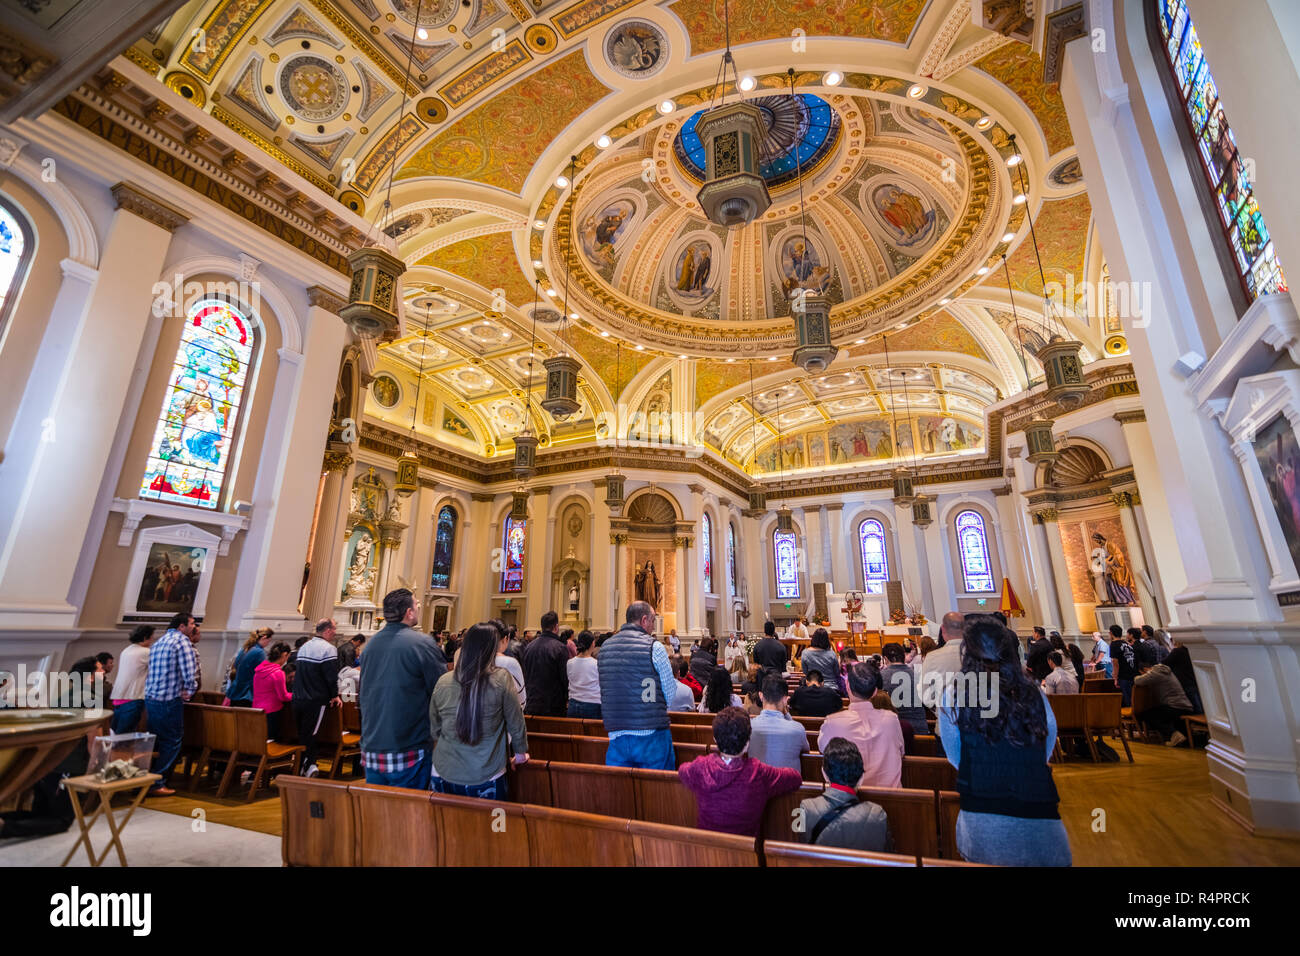 November 25, 2018 San Jose / CA / USA -  People attending mass at the Cathedral Basilica of St. Joseph, a large Roman Catholic church located in downt Stock Photo